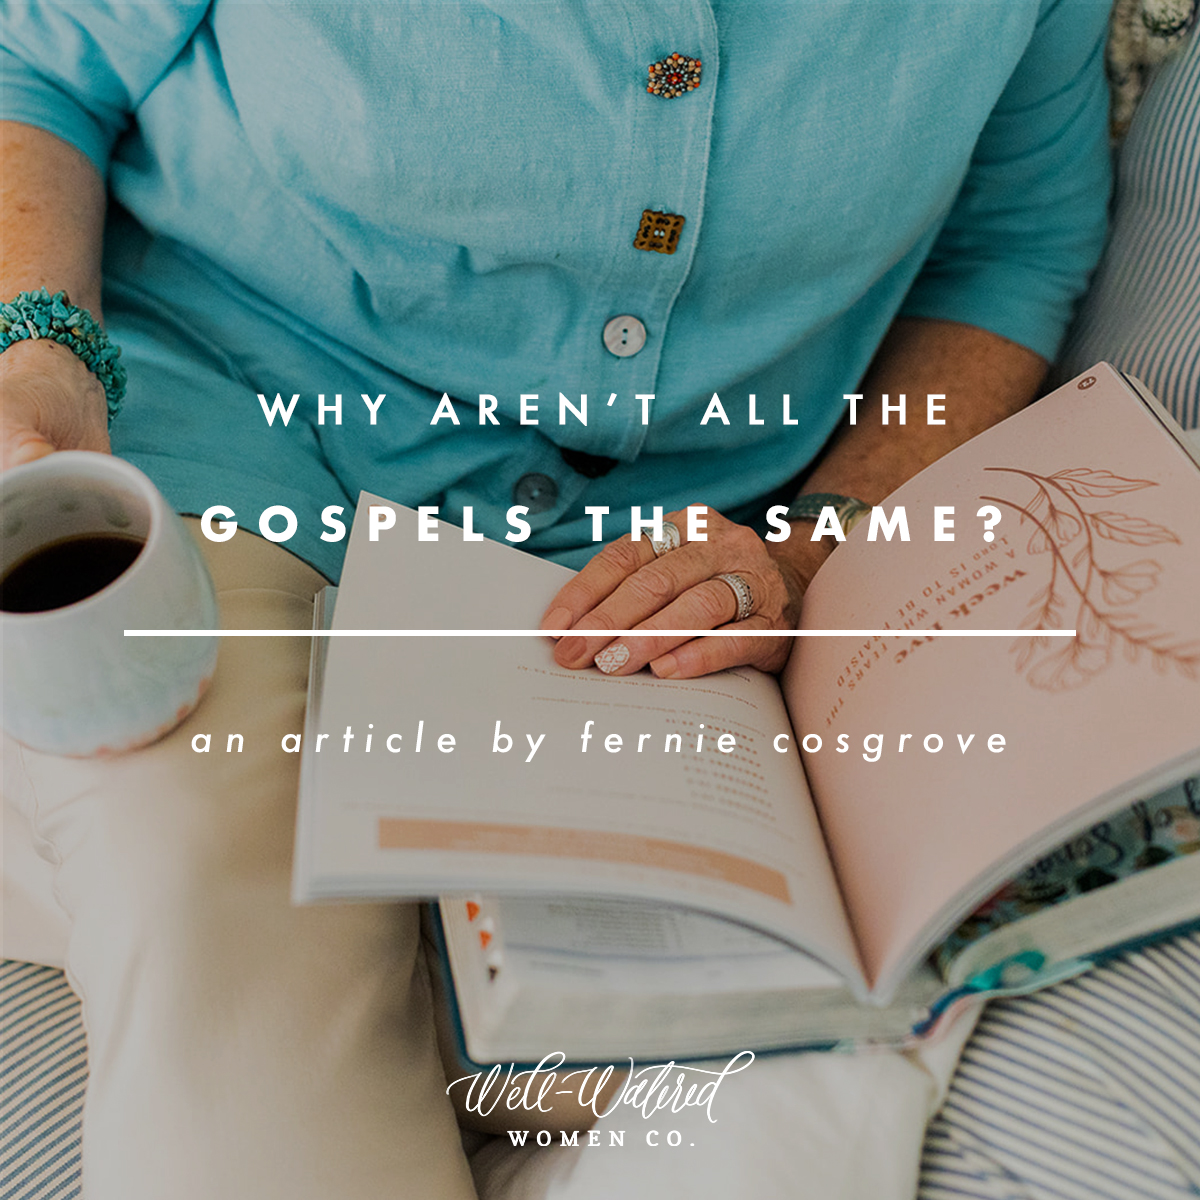 Why Aren't all the Gospels the Same? | Well-Watered Women Articles